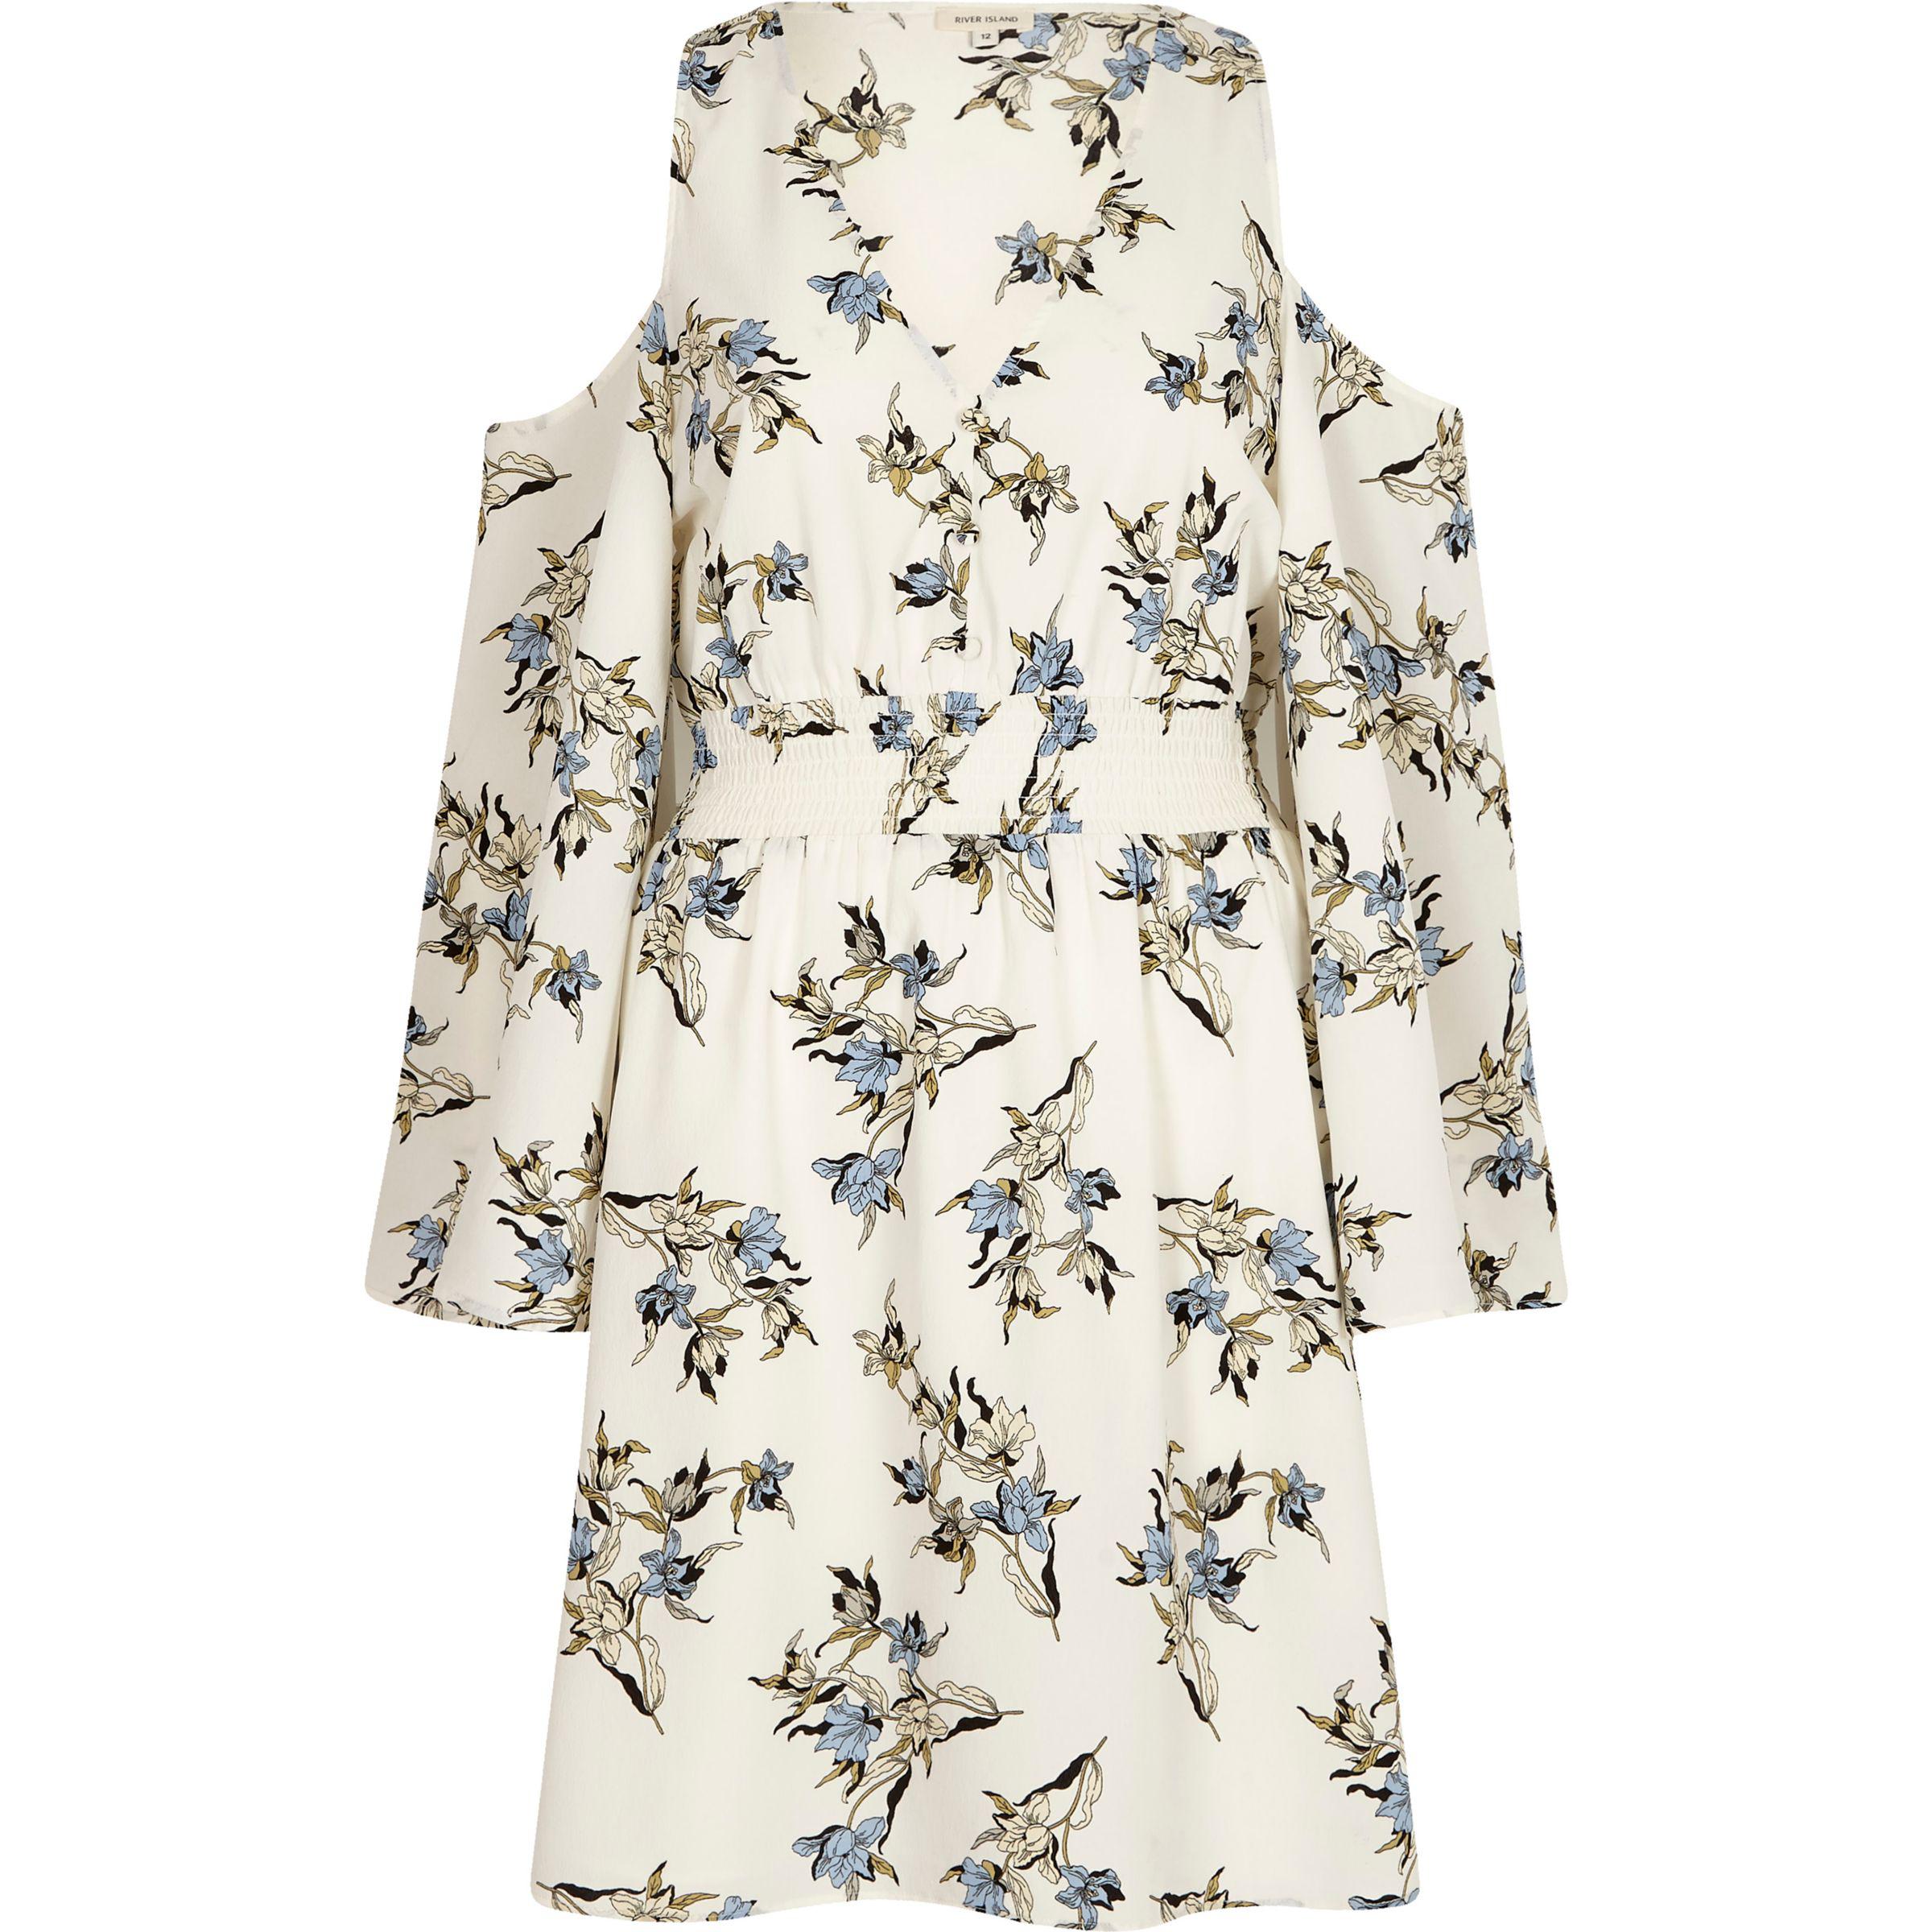 Lyst - River Island Cream Floral Cold Shoulder Puff Sleeve Dress in Natural